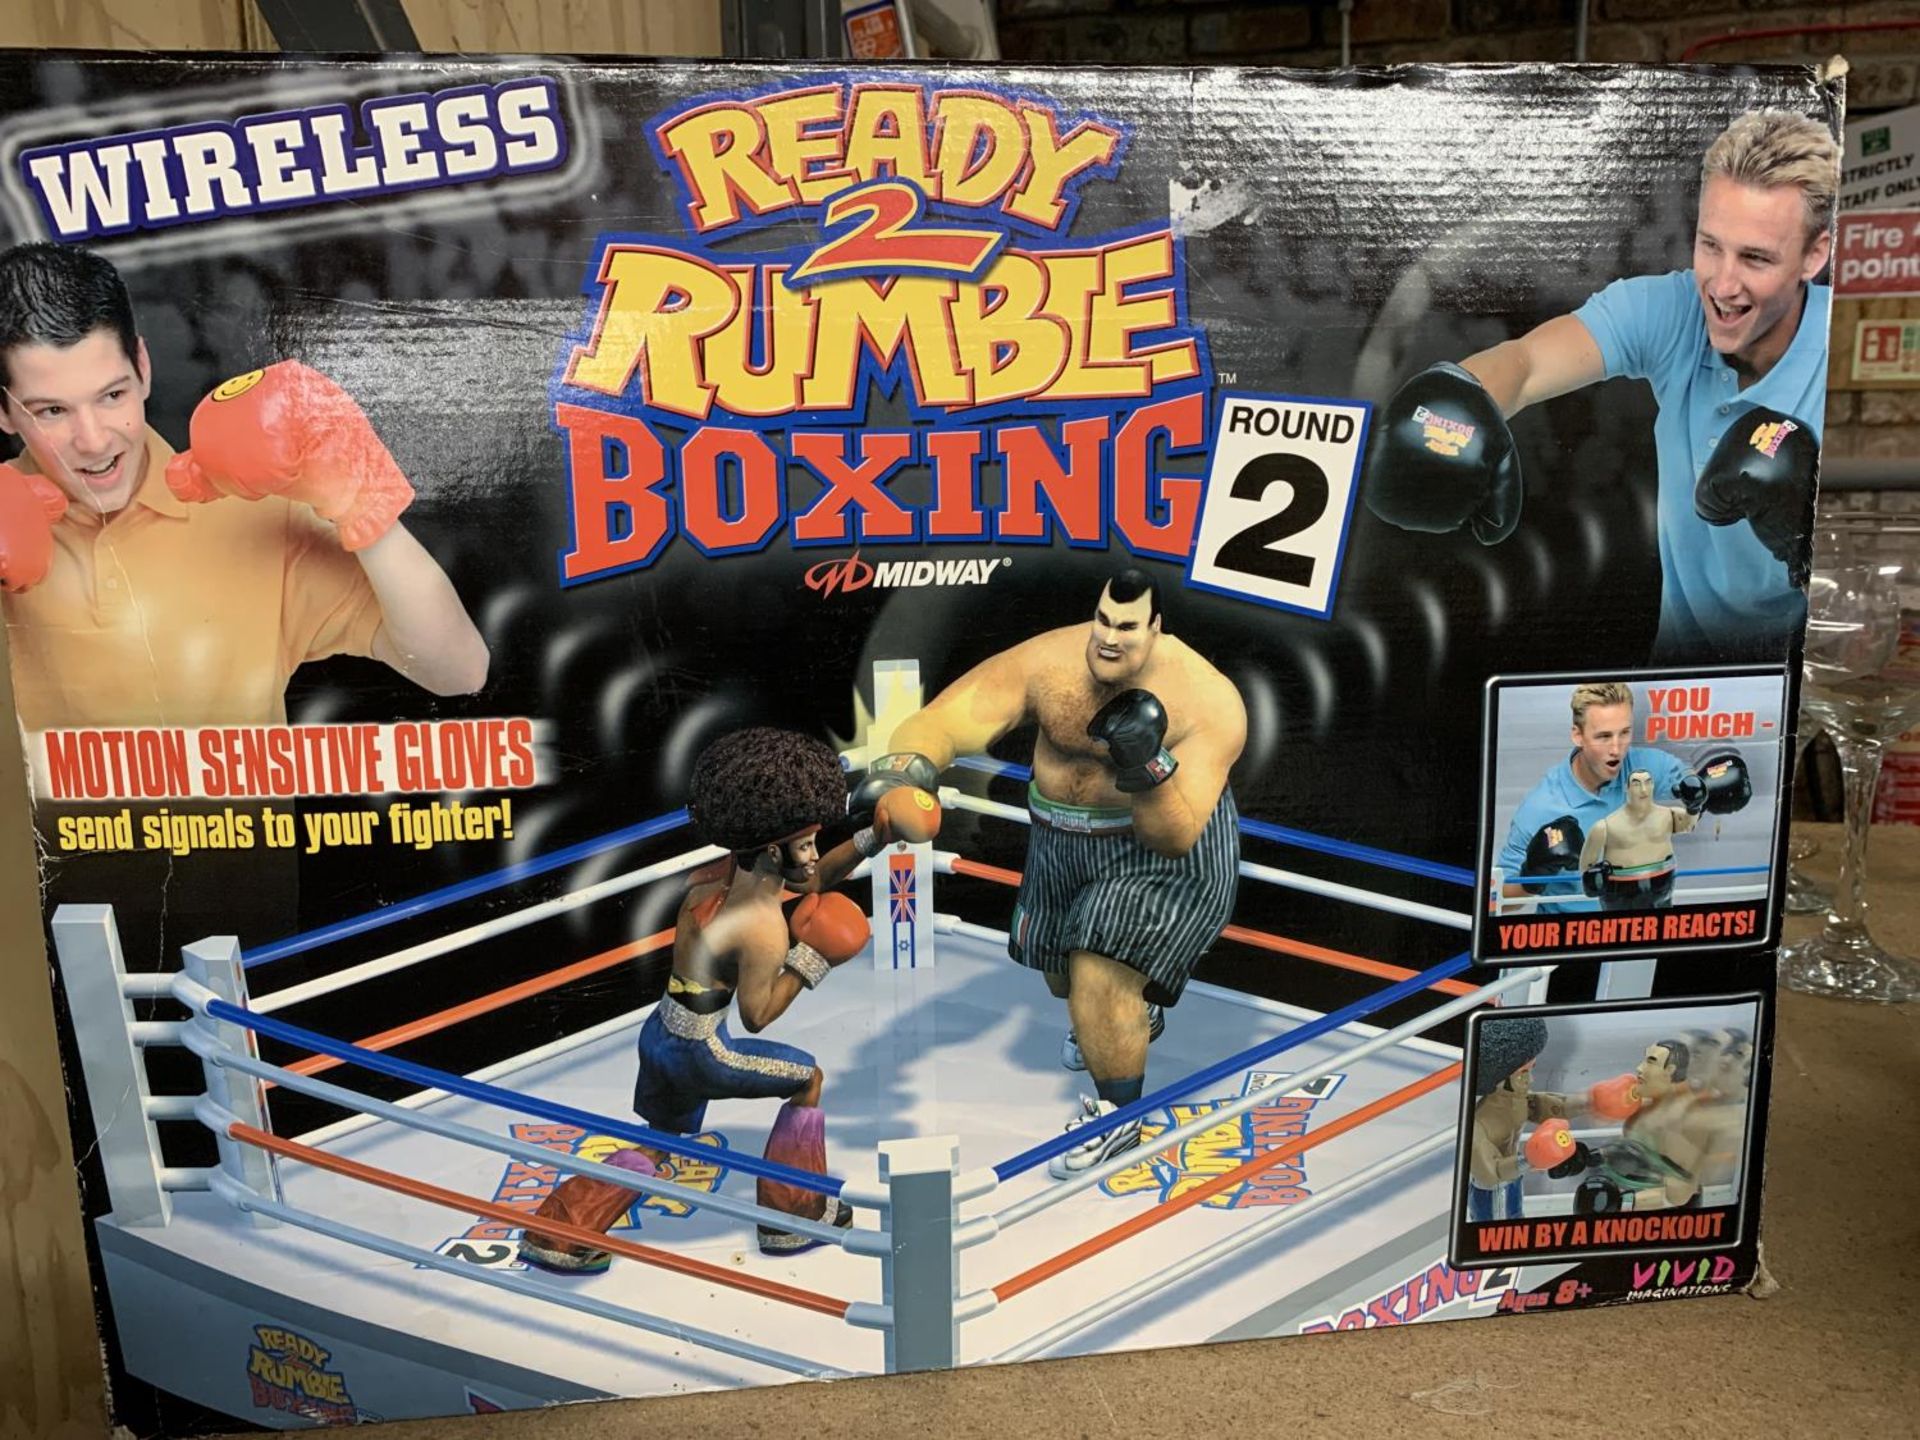 A BOXED WIRELESS 'READY 2 RUMBLE' BOXING SET